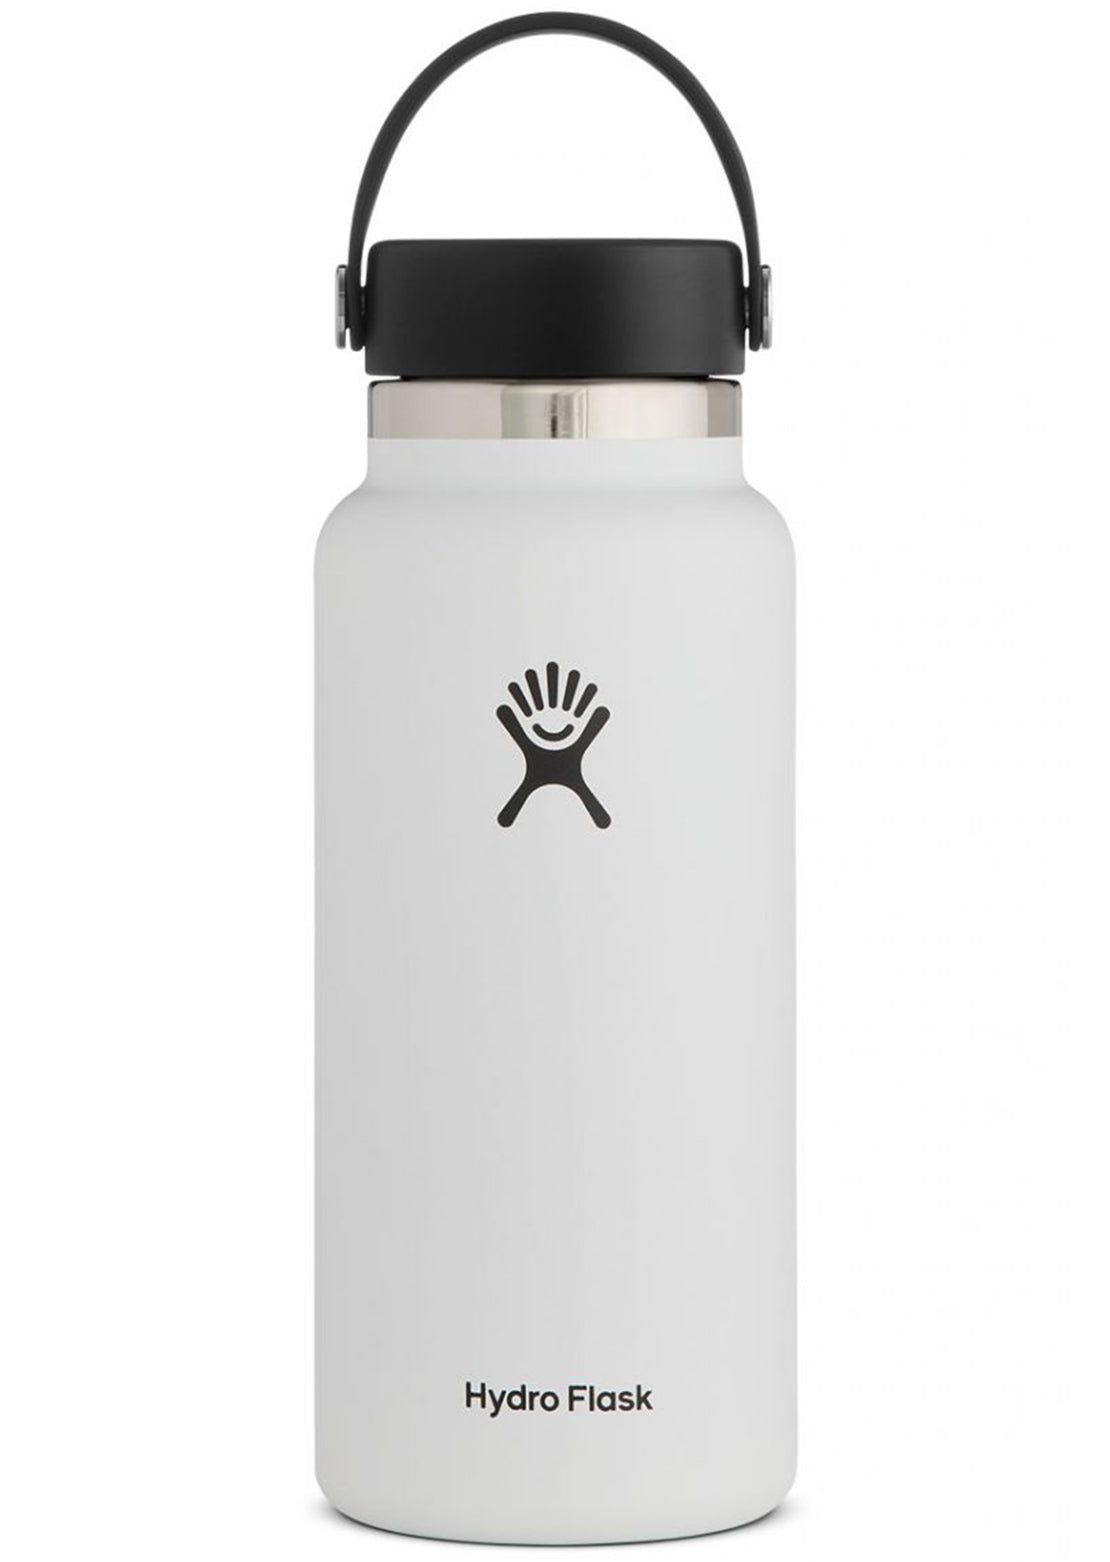 Hydro Flask 32oz Wide Mouth Insulated Bottle White